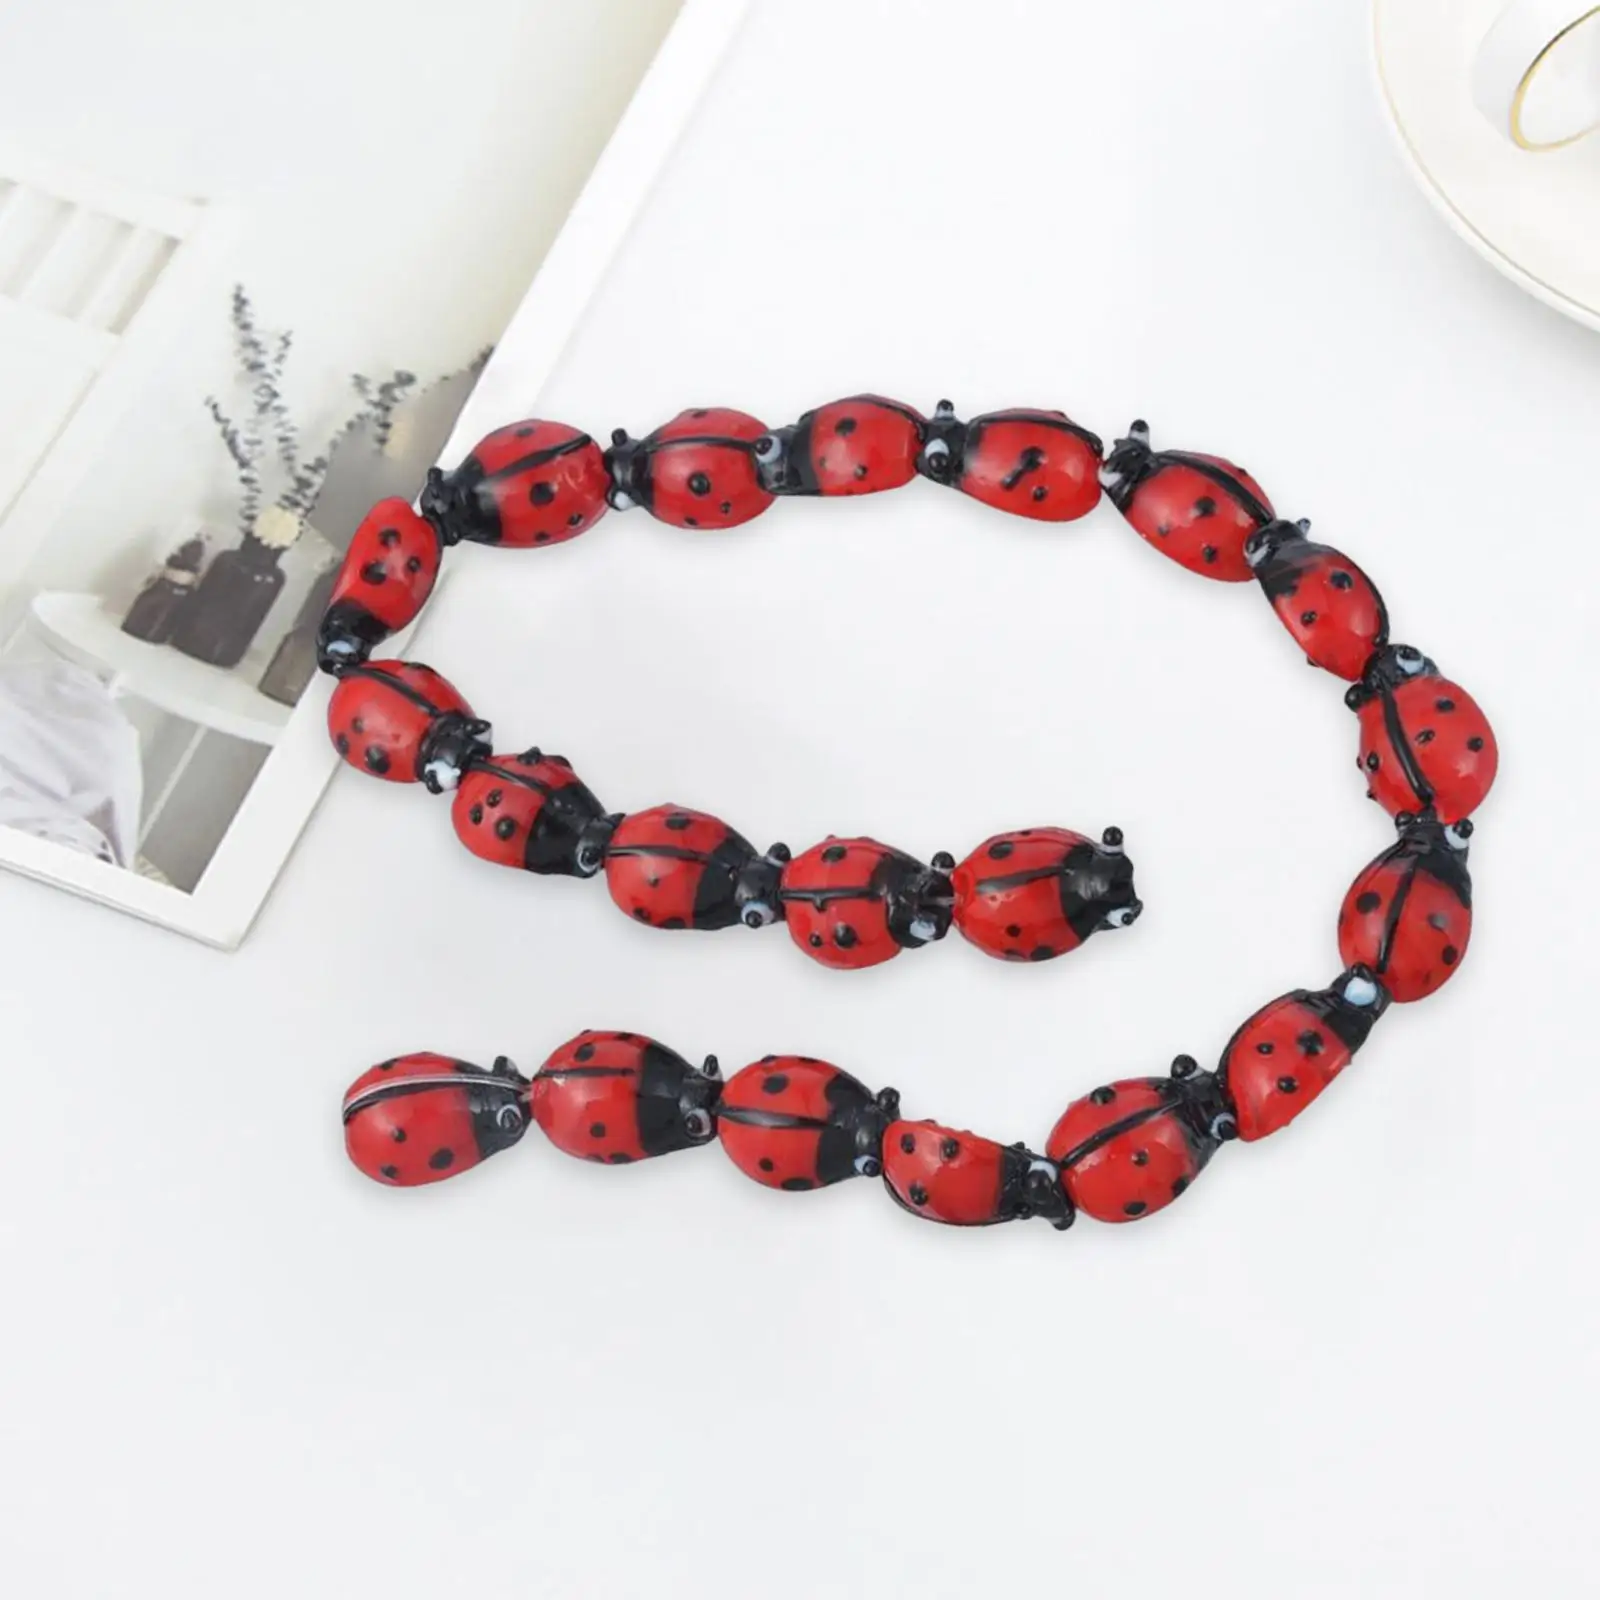 Cute Beetle Spacer Beads Crafts Kit for Craft Making Necklaces Earrings Halloween